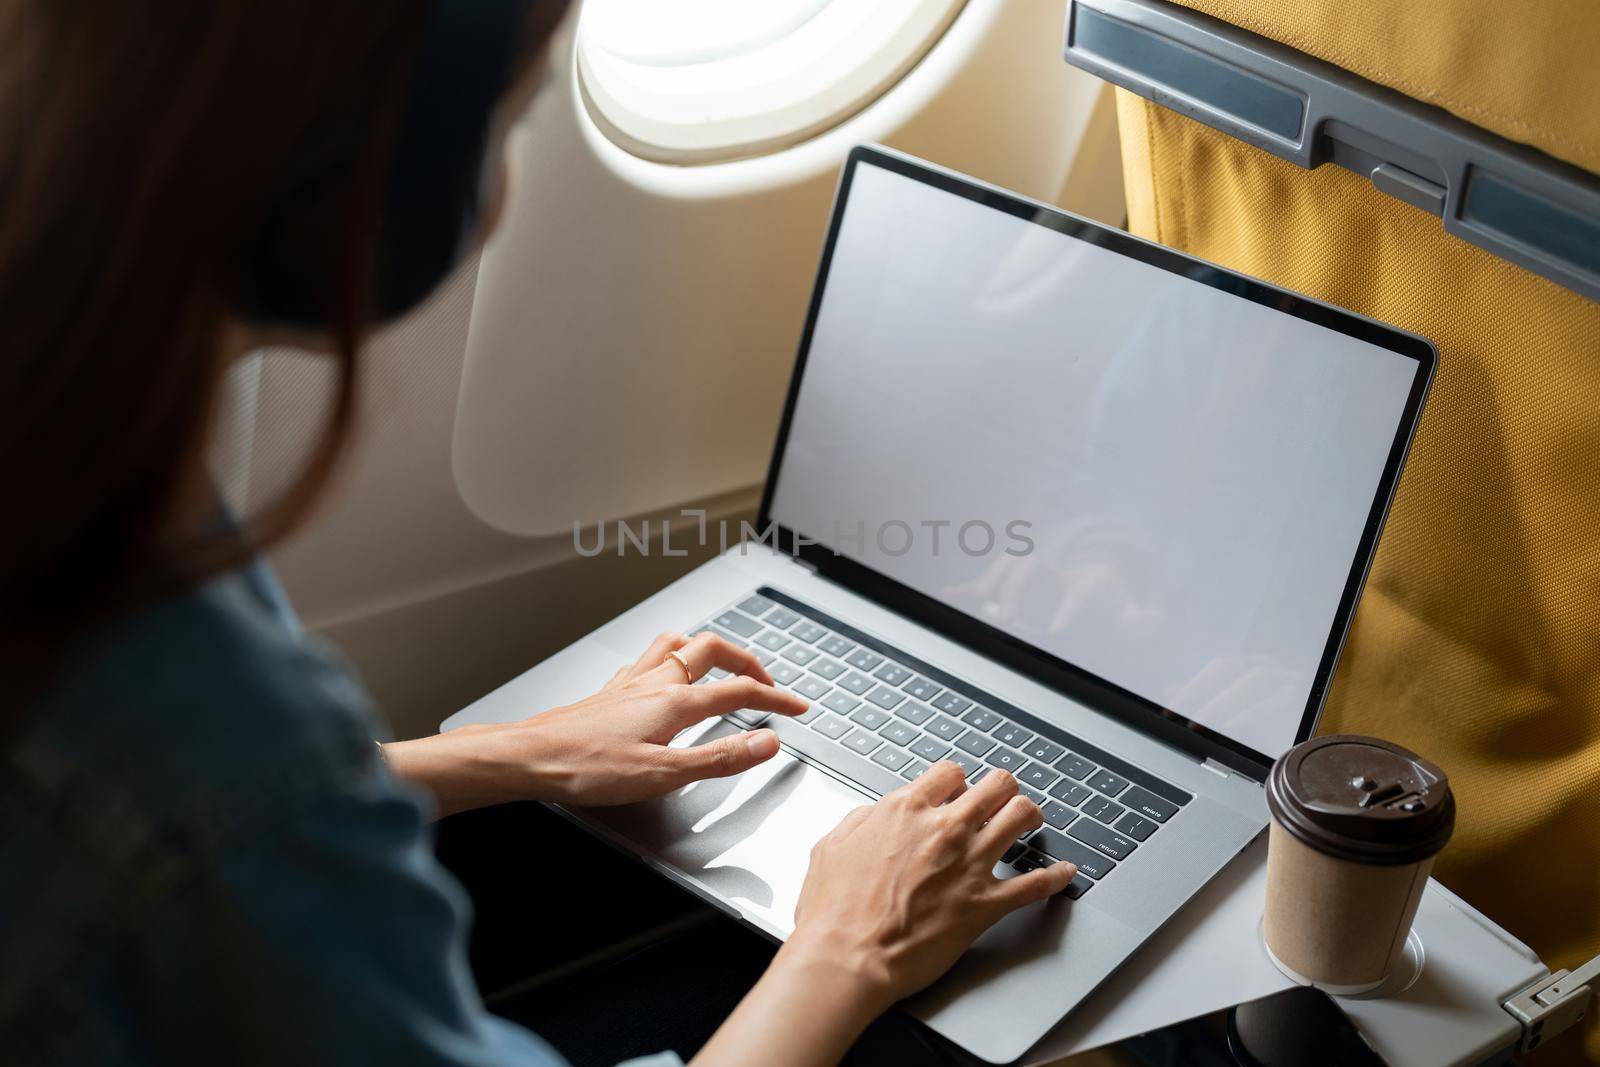 Beautiful asian travel woman using laptop computer in airplane.